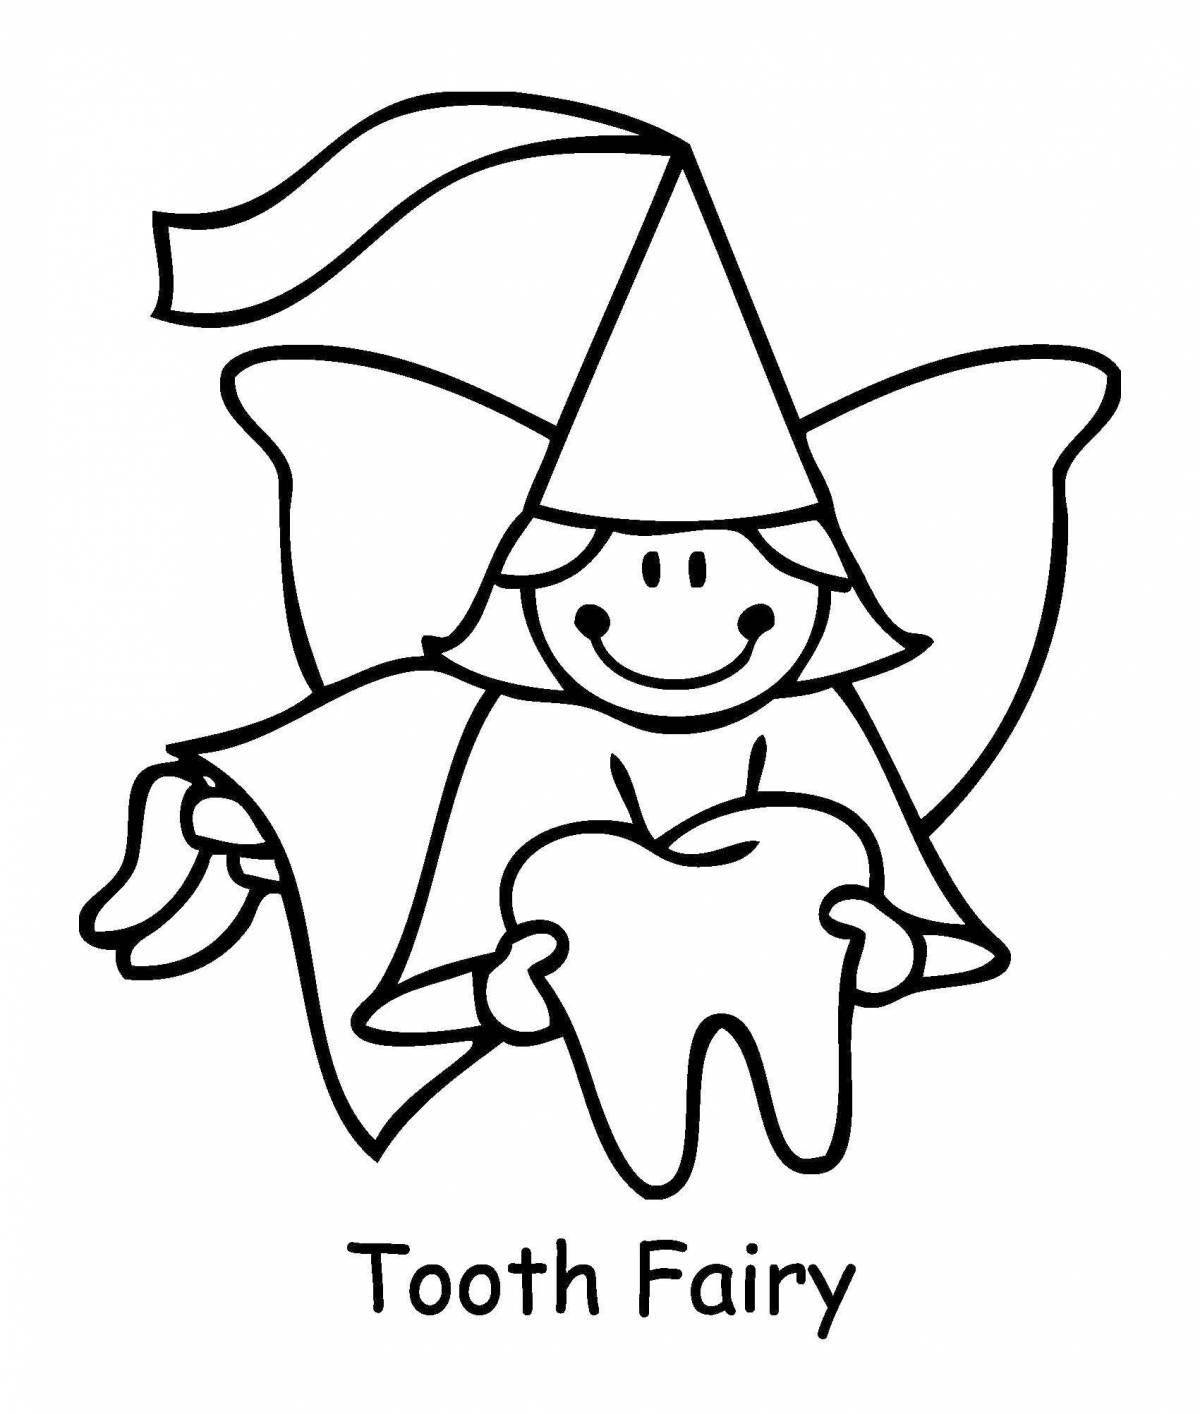 Attractive fairy tooth coloring book for kids